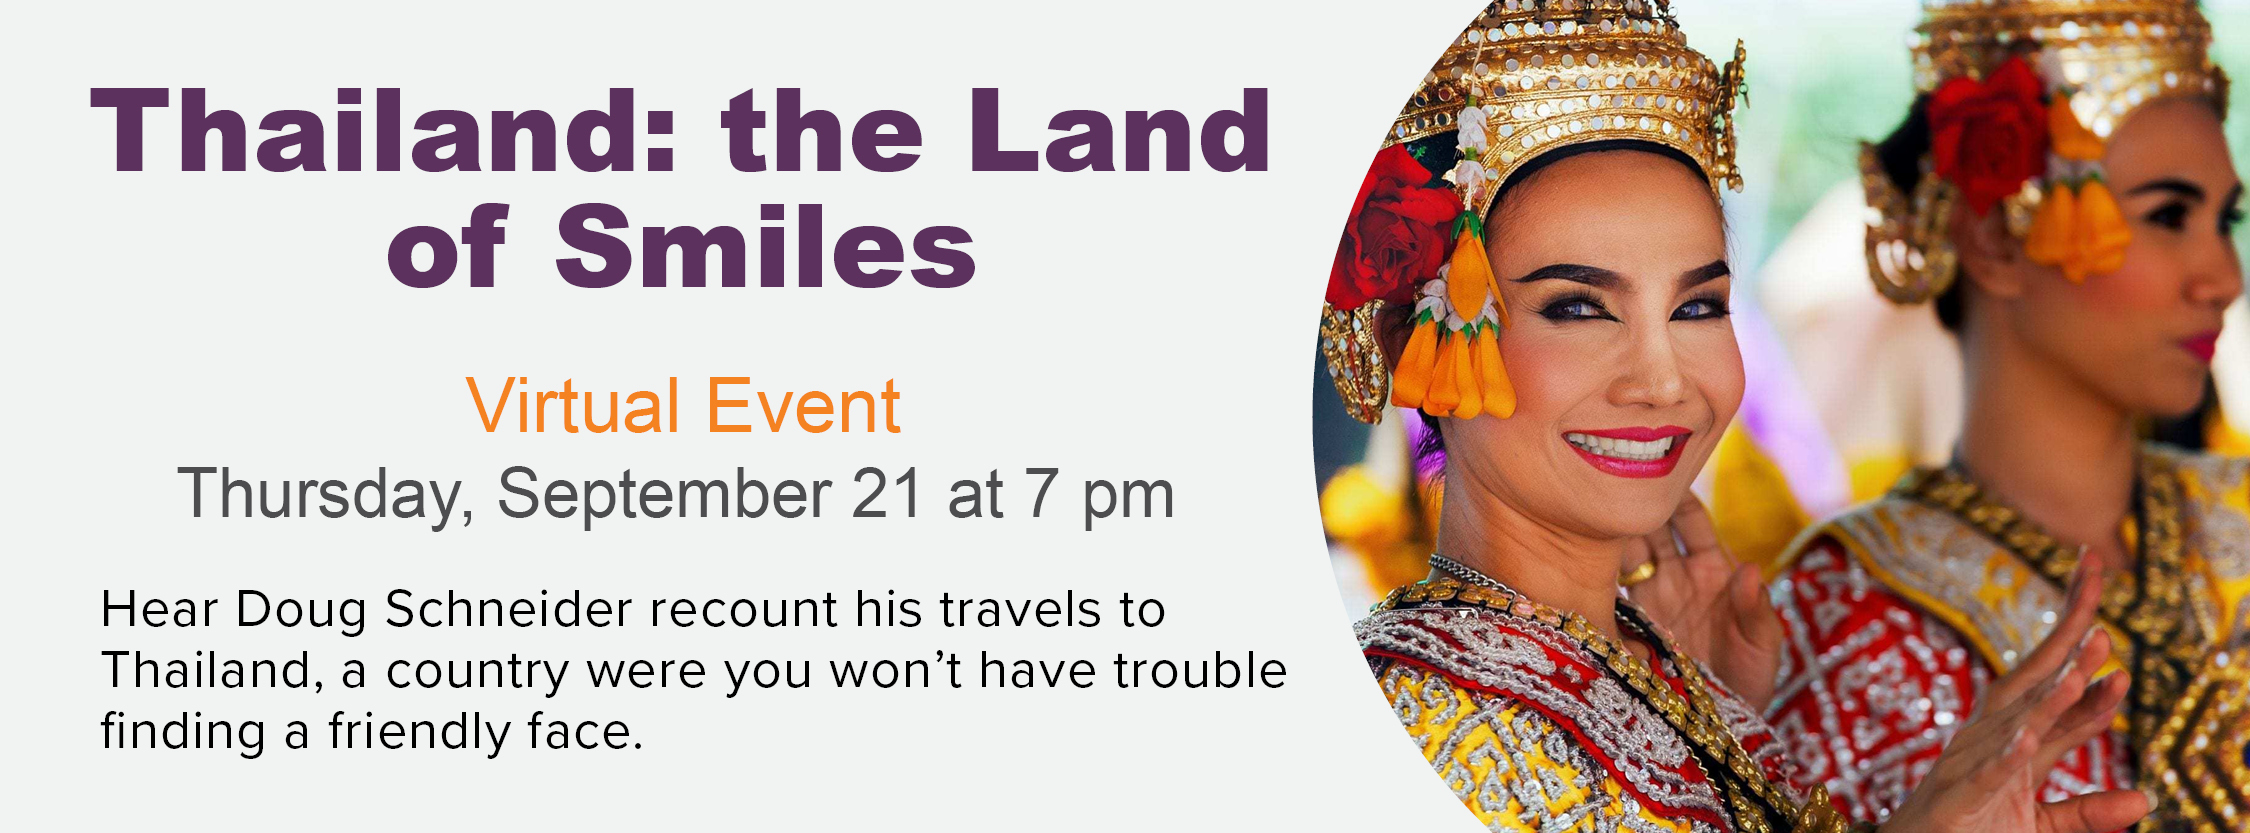 Thailand: the Land of Smiles with Doug Schneider, a virtual event September 21 at 7 p.m.